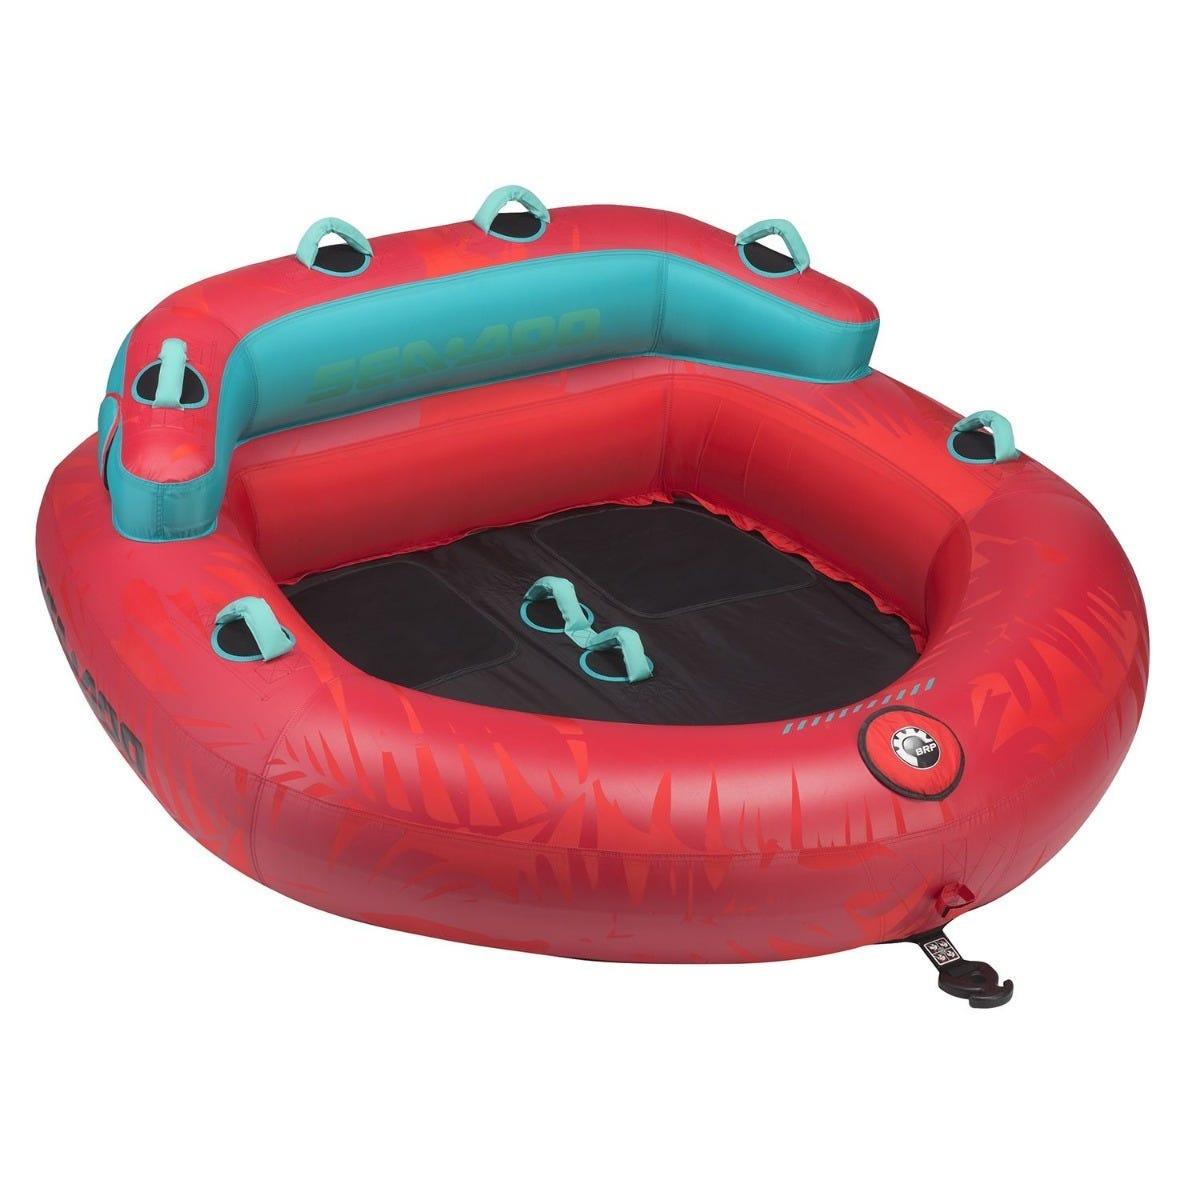 Sea-Doo Two-Person Two-Way Sit-in Tube (172 cm x 170 cm) - Factory Recreation